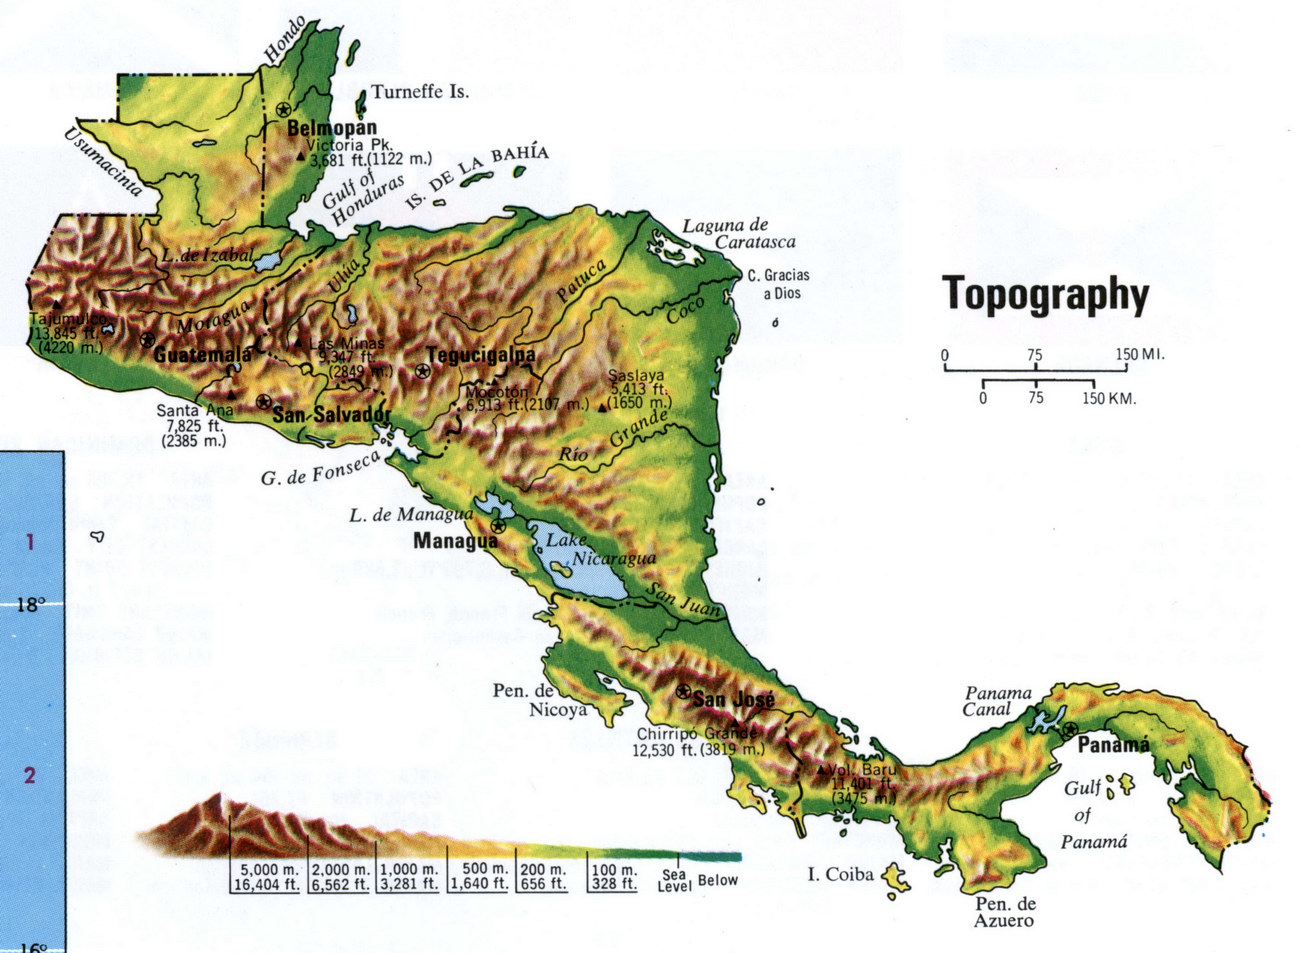 Topographical map of Central America